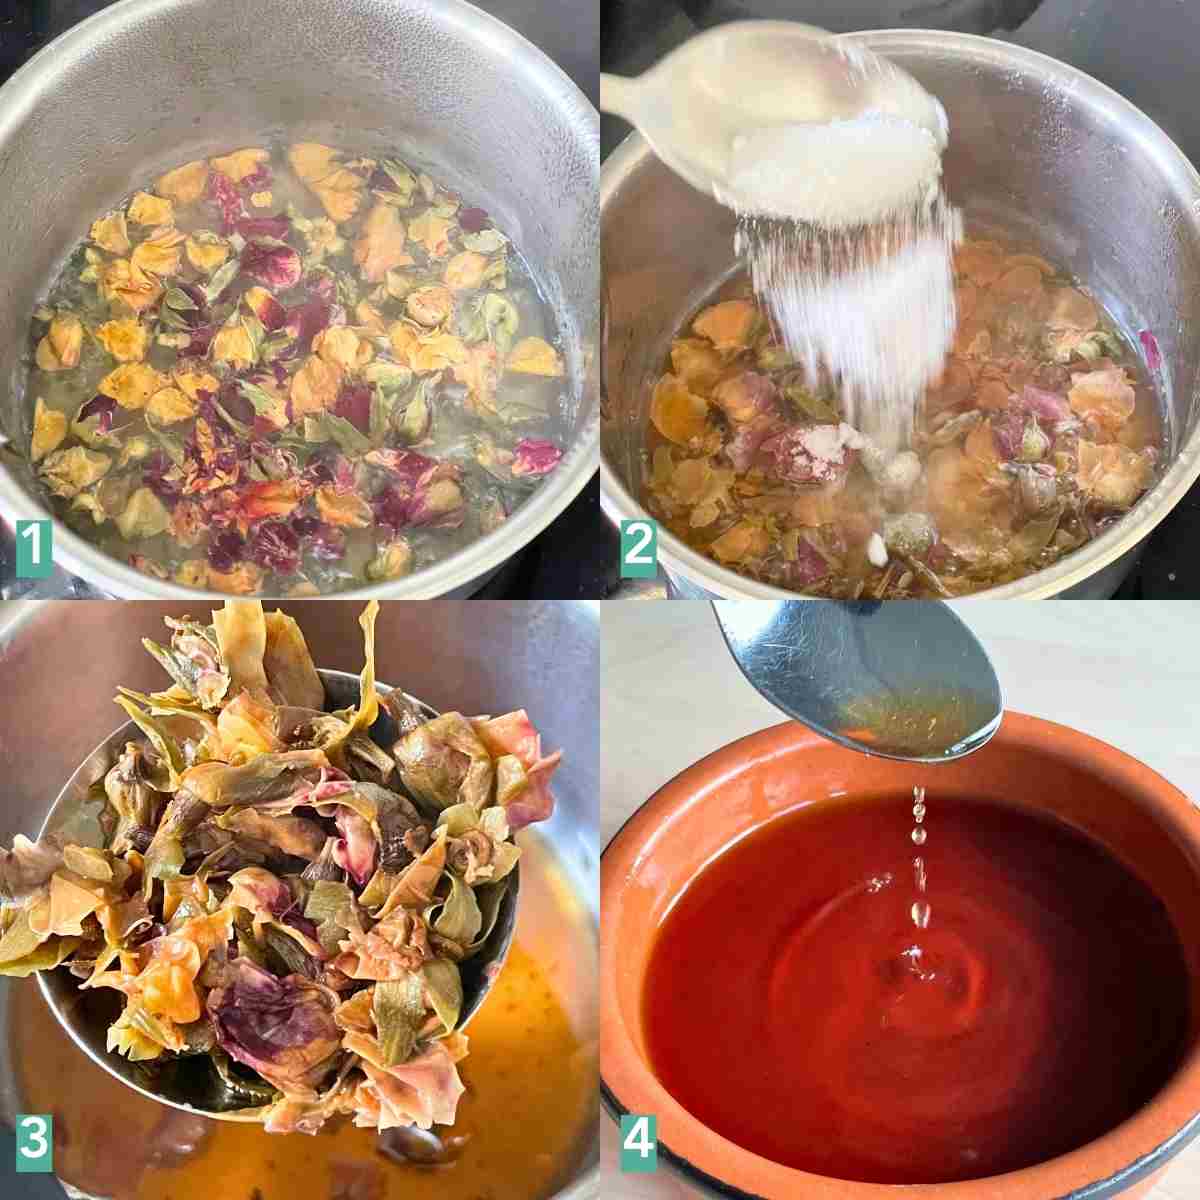 How to make rose syrup at home